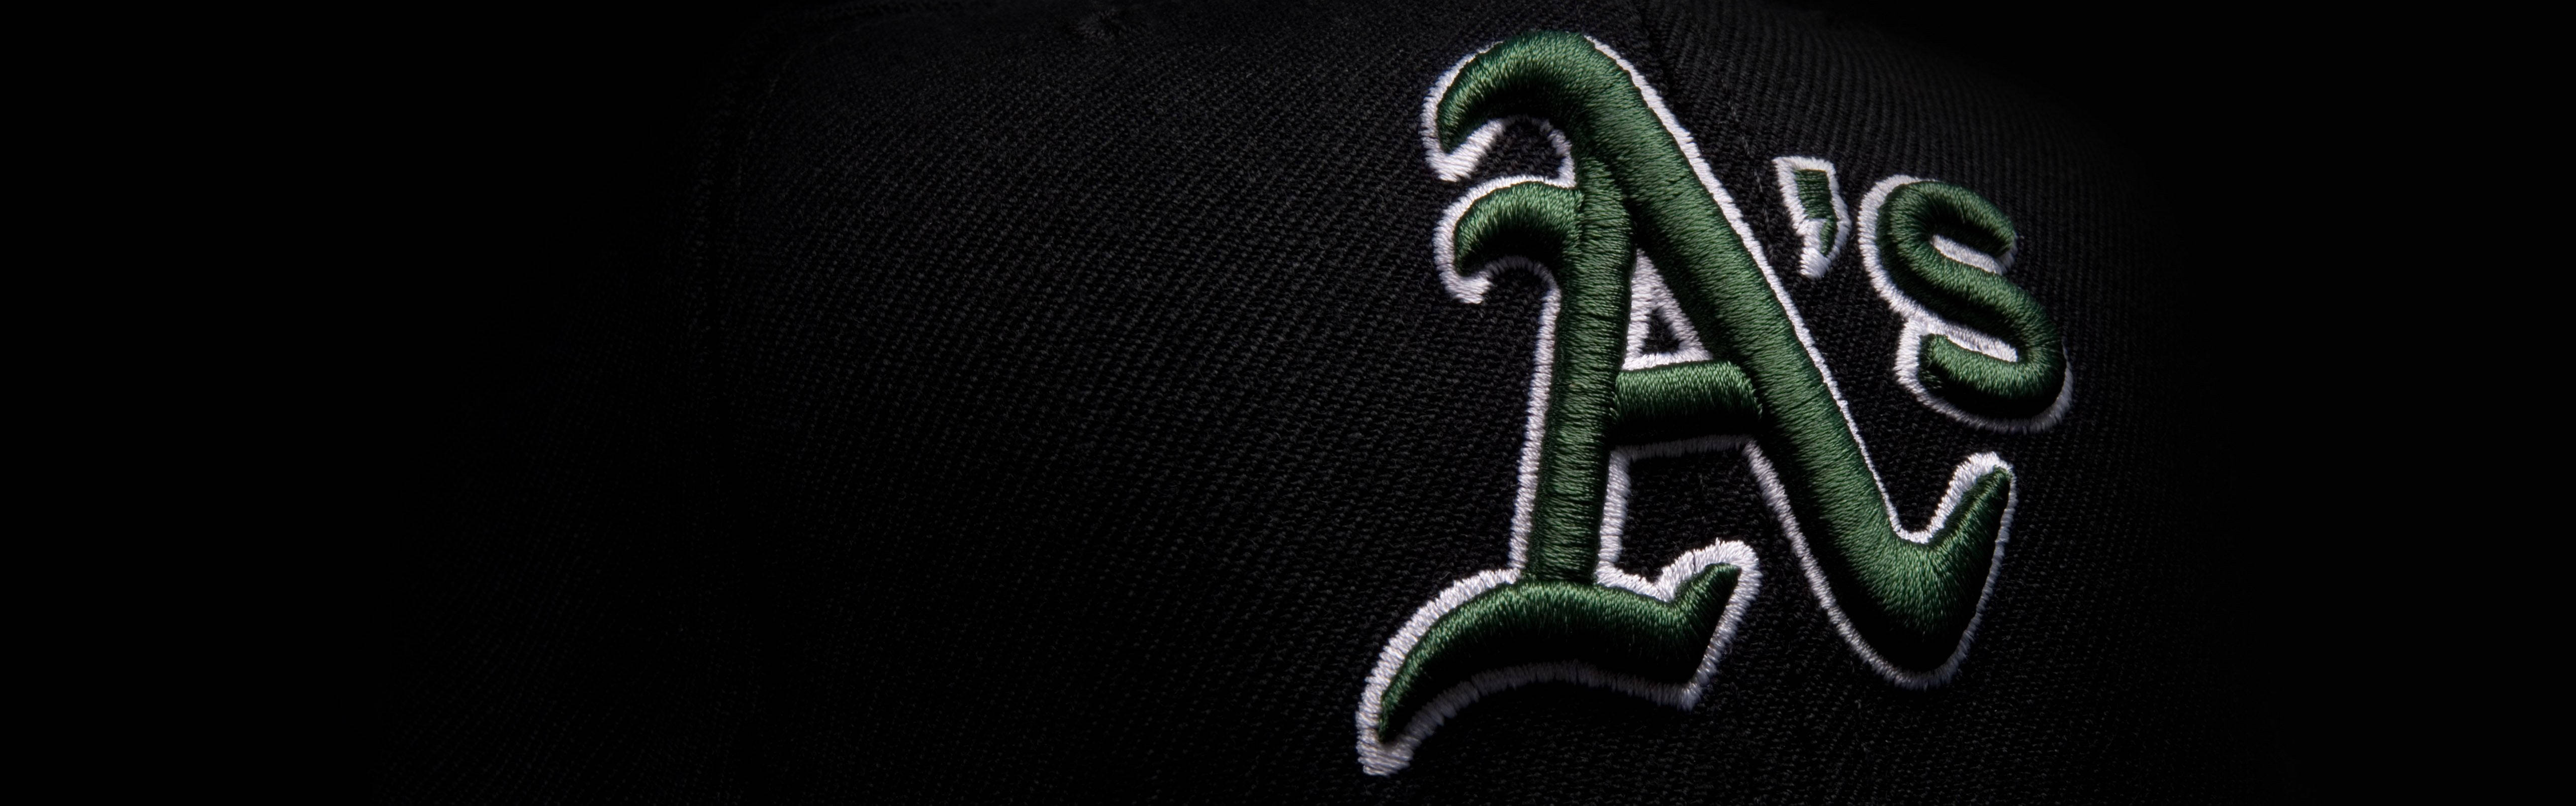 Oakland Athletics Embroidered Hat Wallpaper